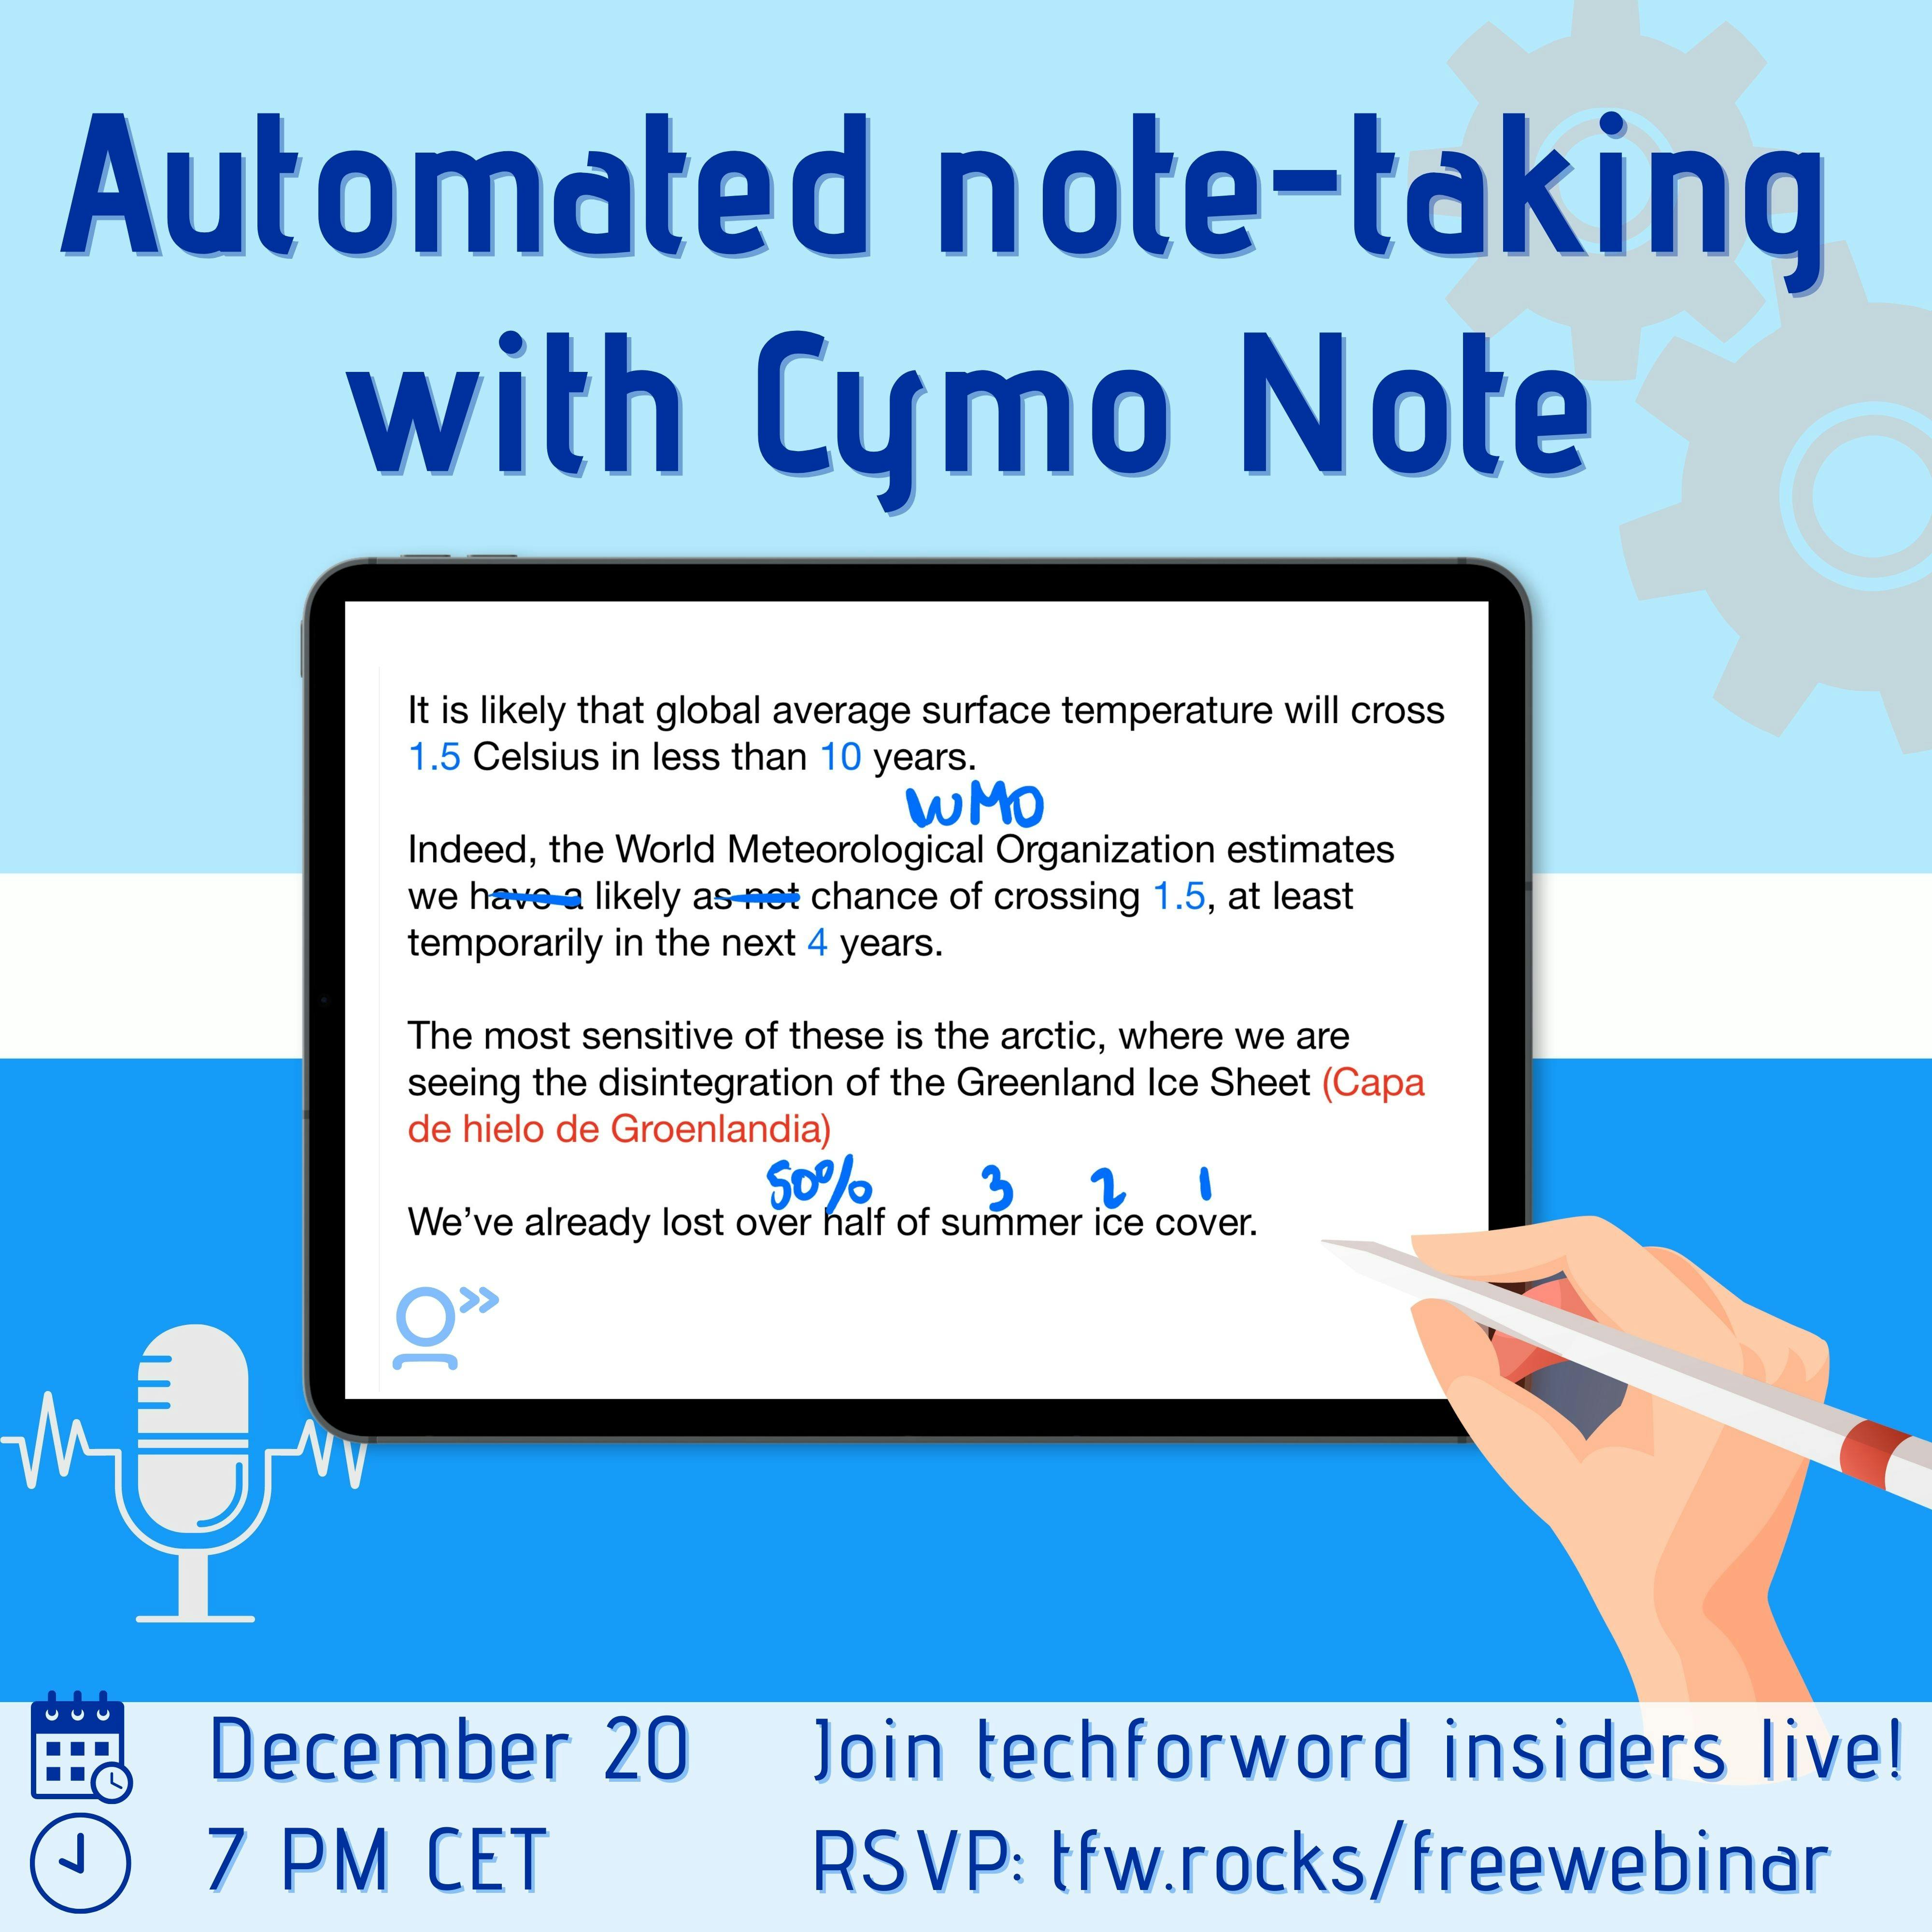 The background is divided into 3 parts: the top part is light blue with grey cogs in the top-right hand corner. Then a white divider bar and the bottom part is the techforword blue with a white microphone icon in the bottom-left hand corner. A hand is writing on a tablet with the screenshot of Cymo Note in action. At the very bottom, we have all the details such as date and time for the webinar. December 20 at 7 PM CET. Join techforword insiders live. RSVP: tfw.rocks/freewebinar